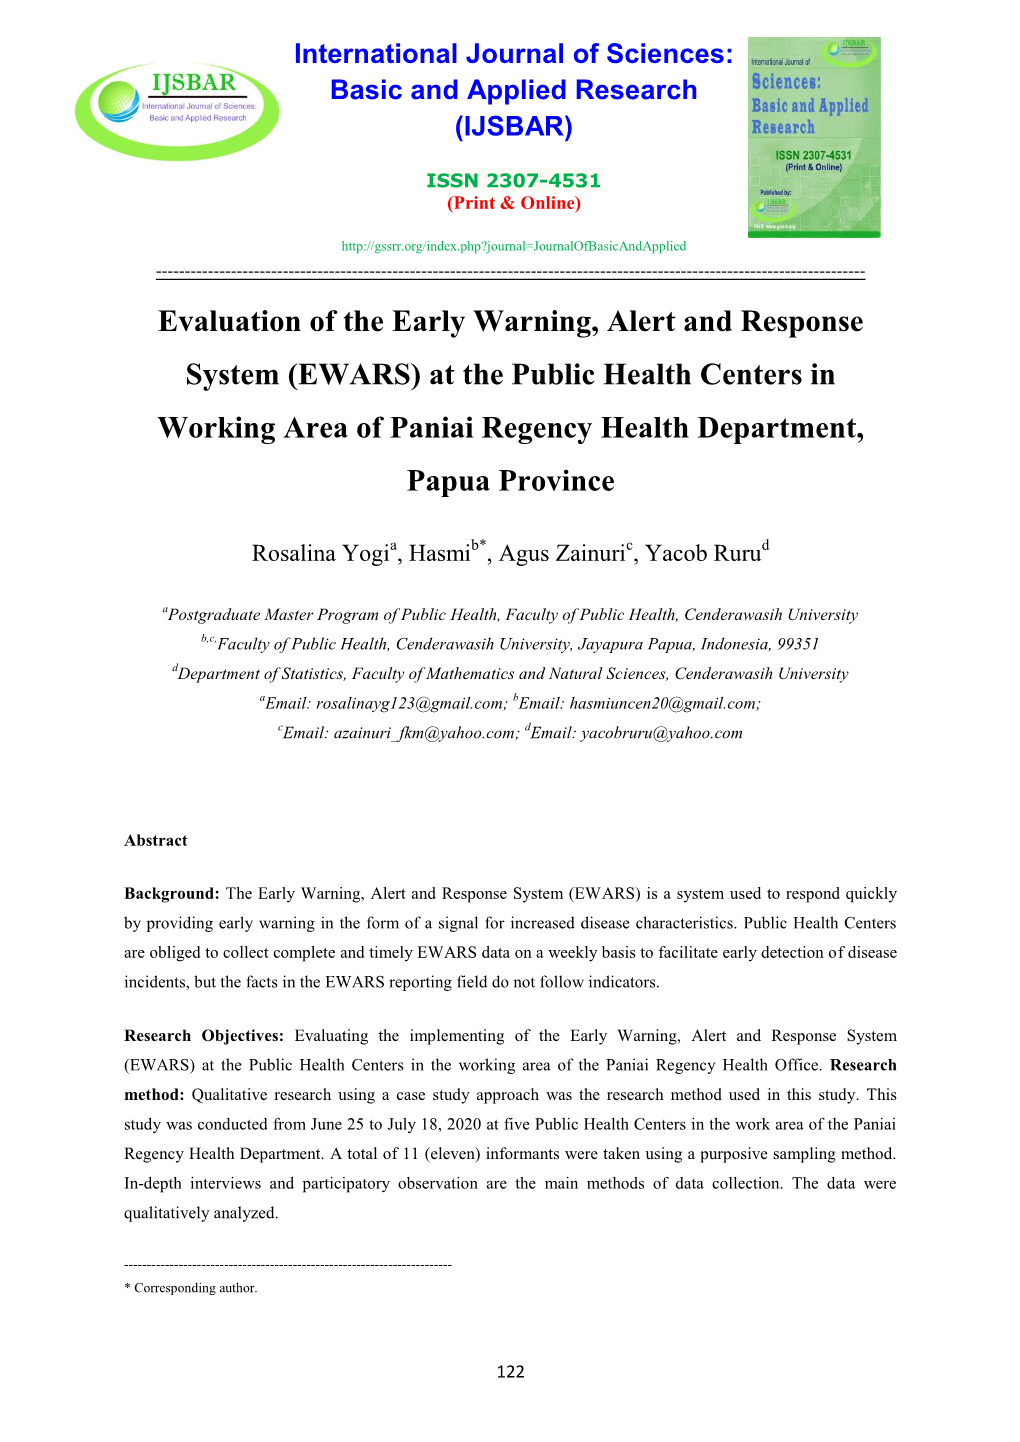 Evaluation of the Early Warning, Alert and Response System (EWARS) at the Public Health Centers in Working Area of Paniai Regency Health Department, Papua Province